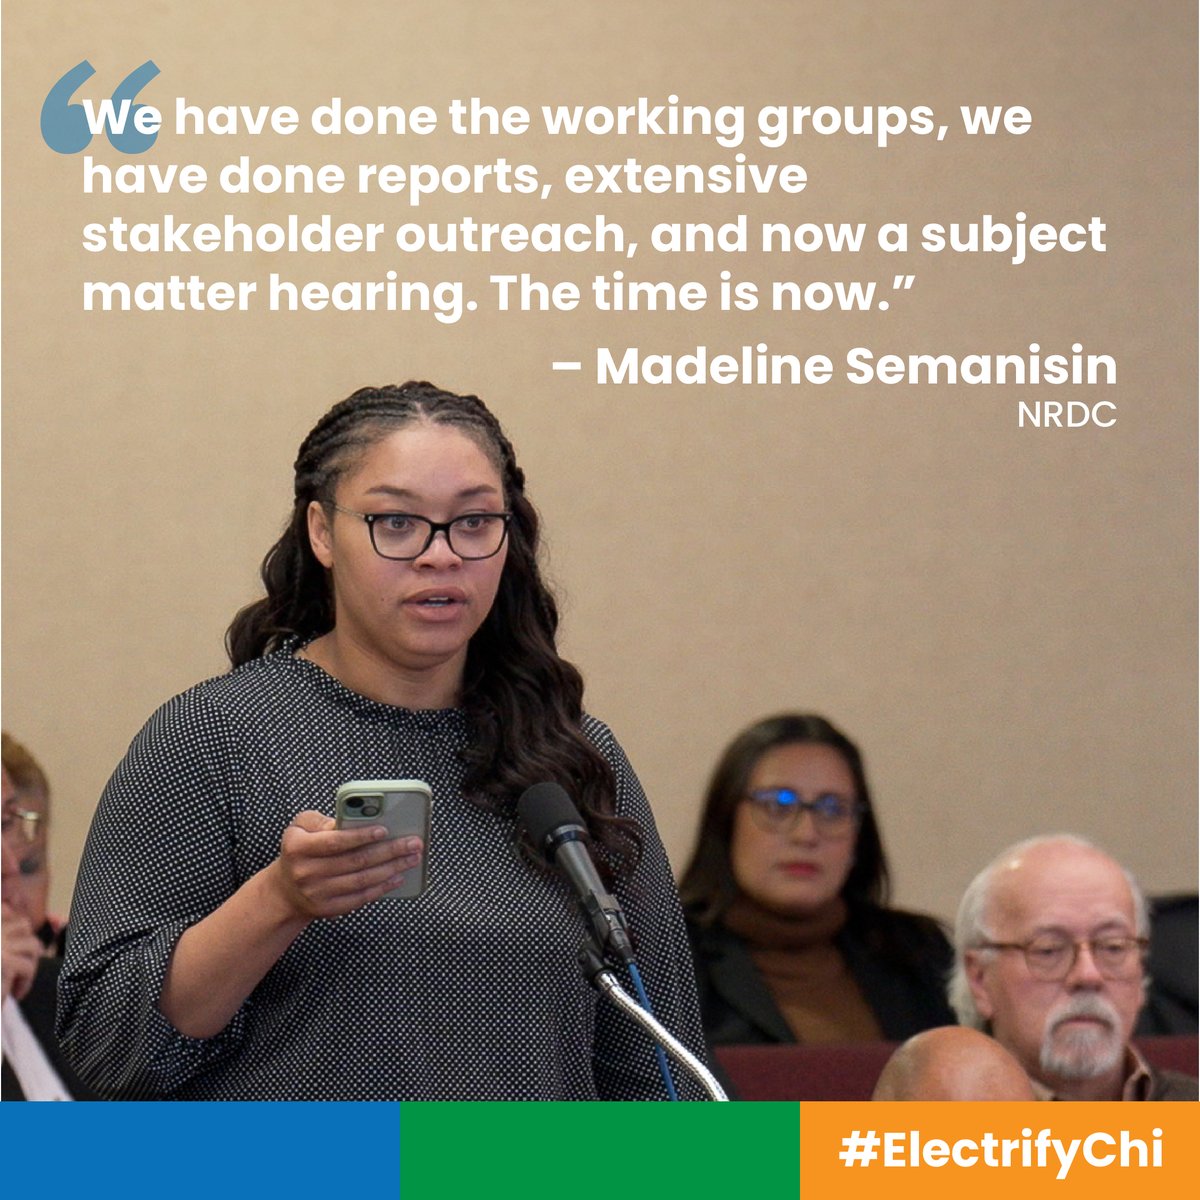 After extensive stakeholder outreach, exhaustive reports, and a nine hour subject matter hearing, it's time for action. Urge your alder to support the Clean and Affordable Buildings Ordinance! ilcleanjobs.org/cabo #ElectrifyChi